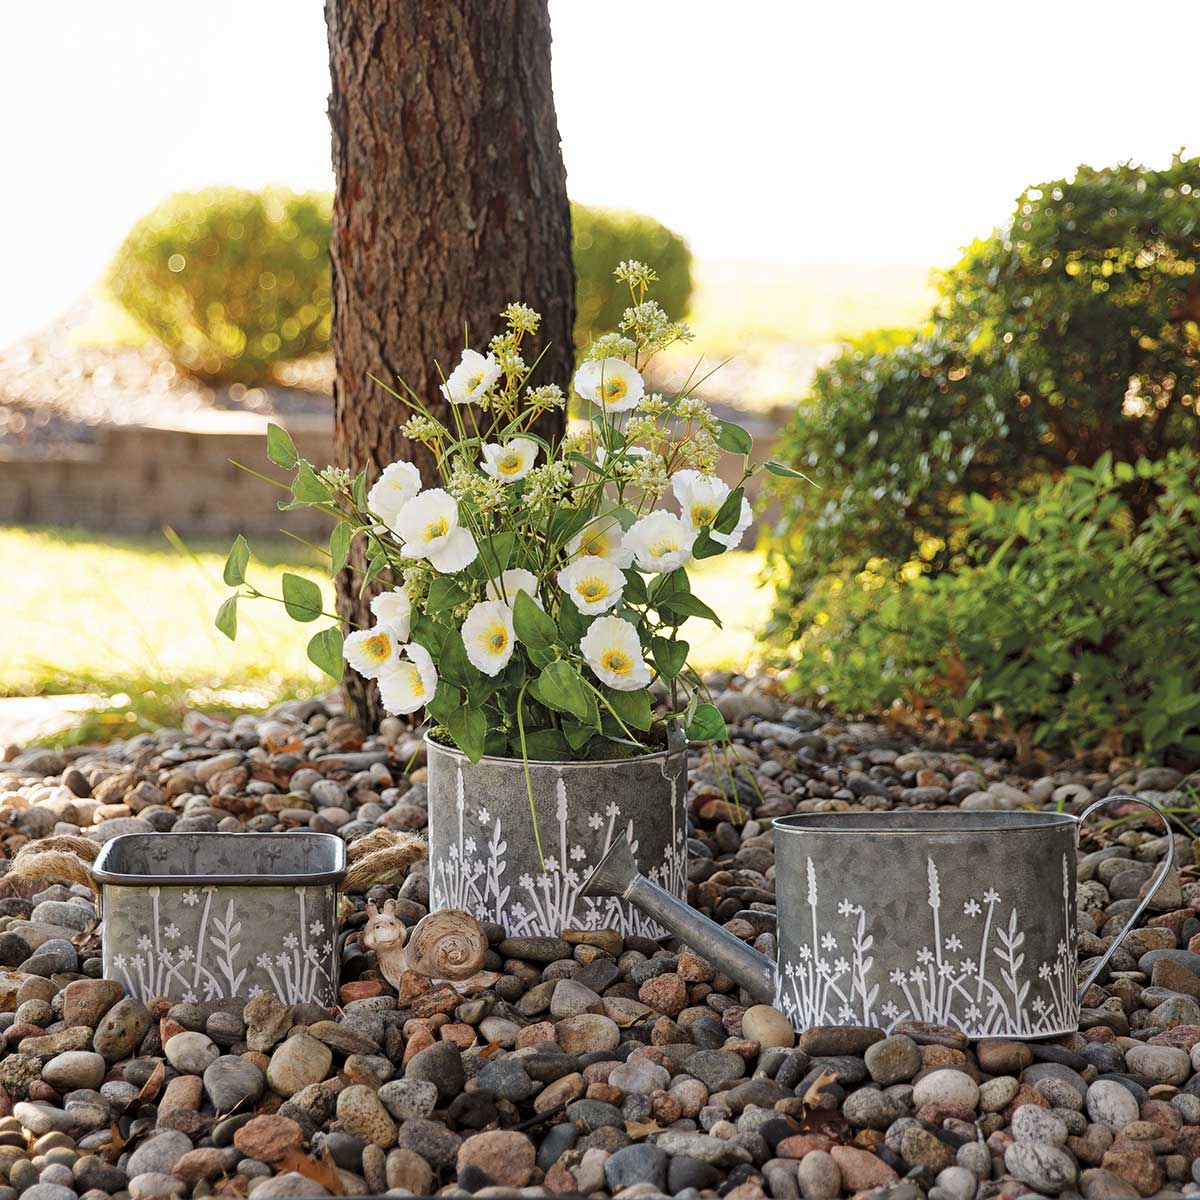 BUCKET MEADOW MOTIF LARGE 9IN X 7IN METAL - Click Image to Close